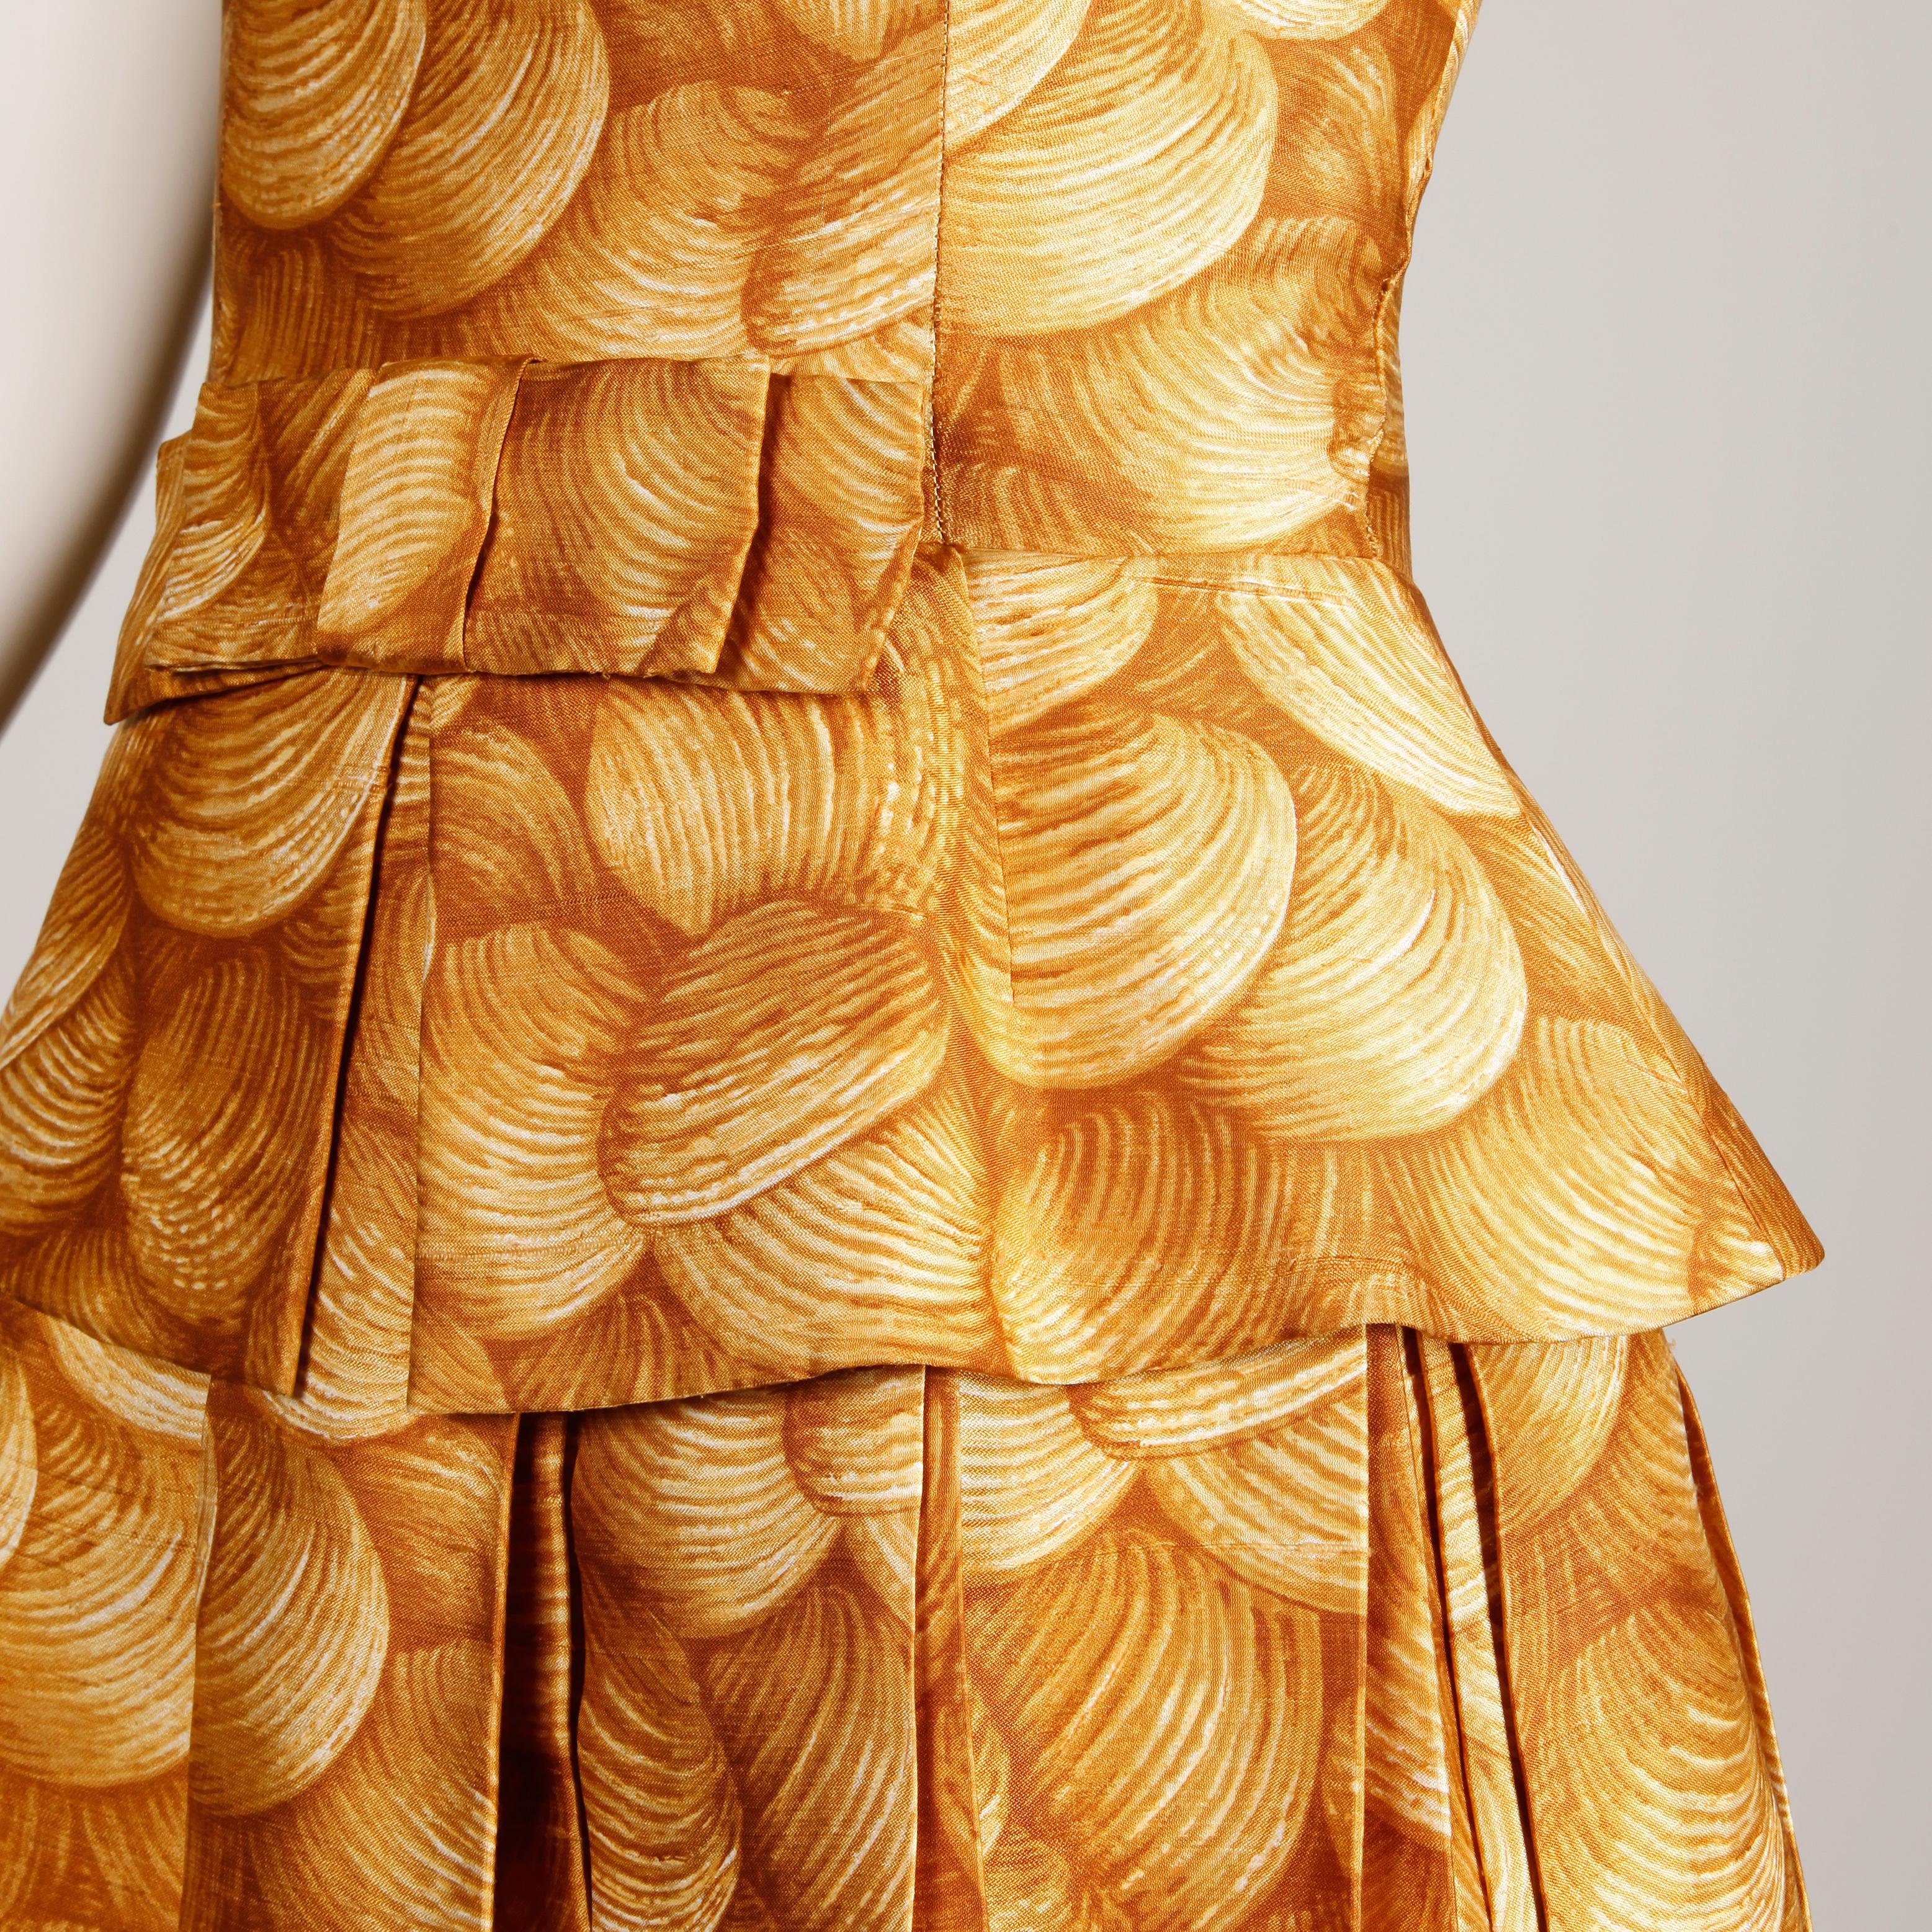 Women's 1950s Arnold Scaasi Vintage Yellow / Gold / Mustard Print Silk Cocktail Dress For Sale